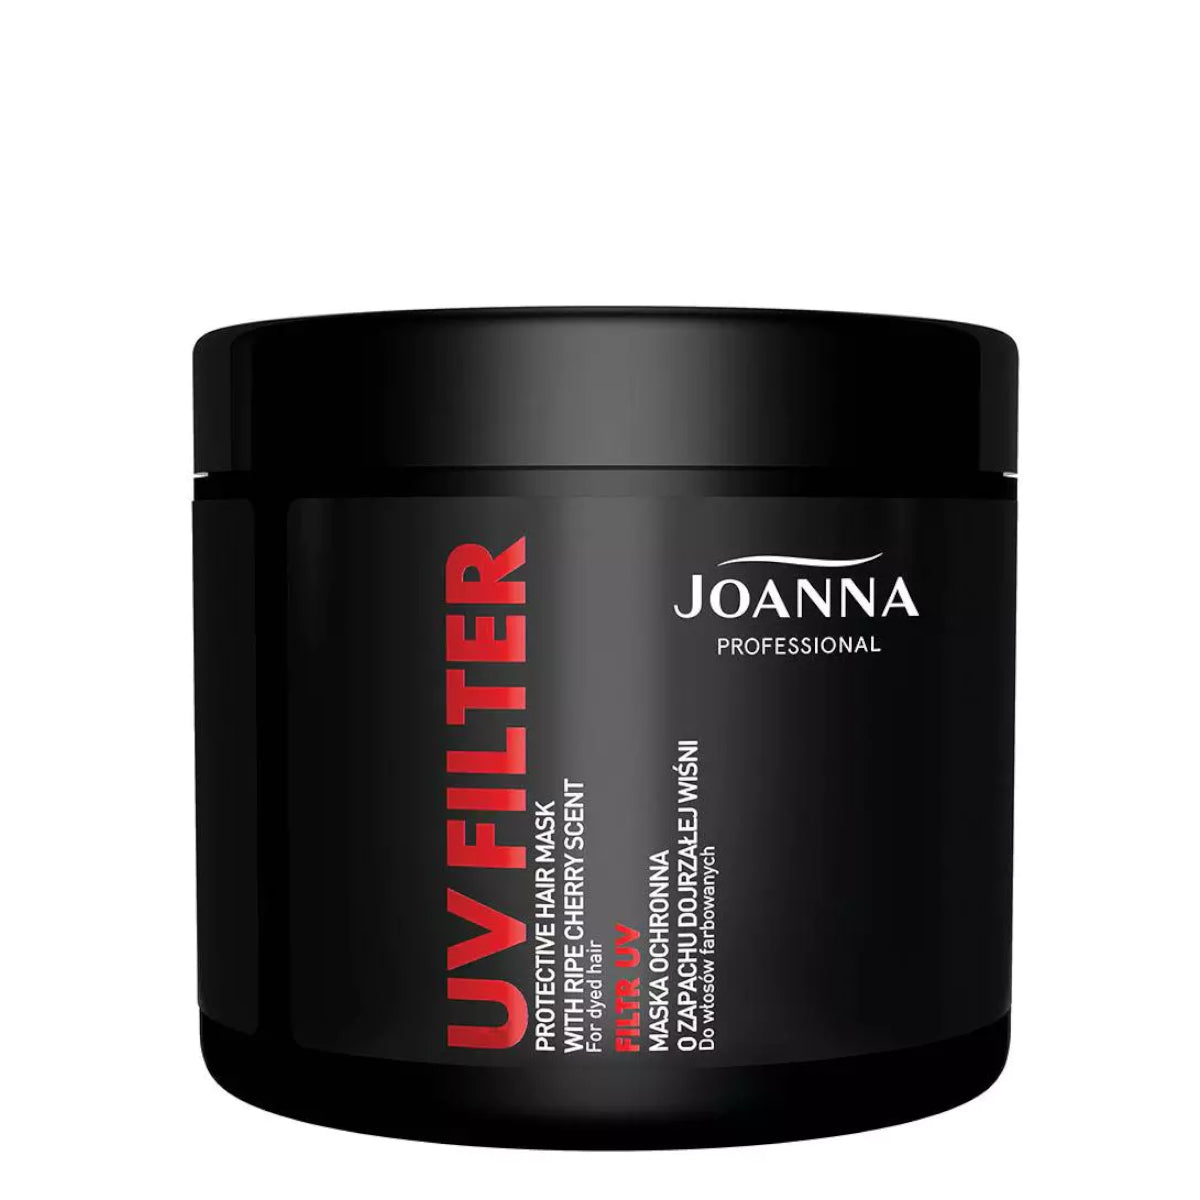 Joanna Professional UV Filter Protective Hair Care Bundle for Dyed Hair Mask - Roxie Cosmetics